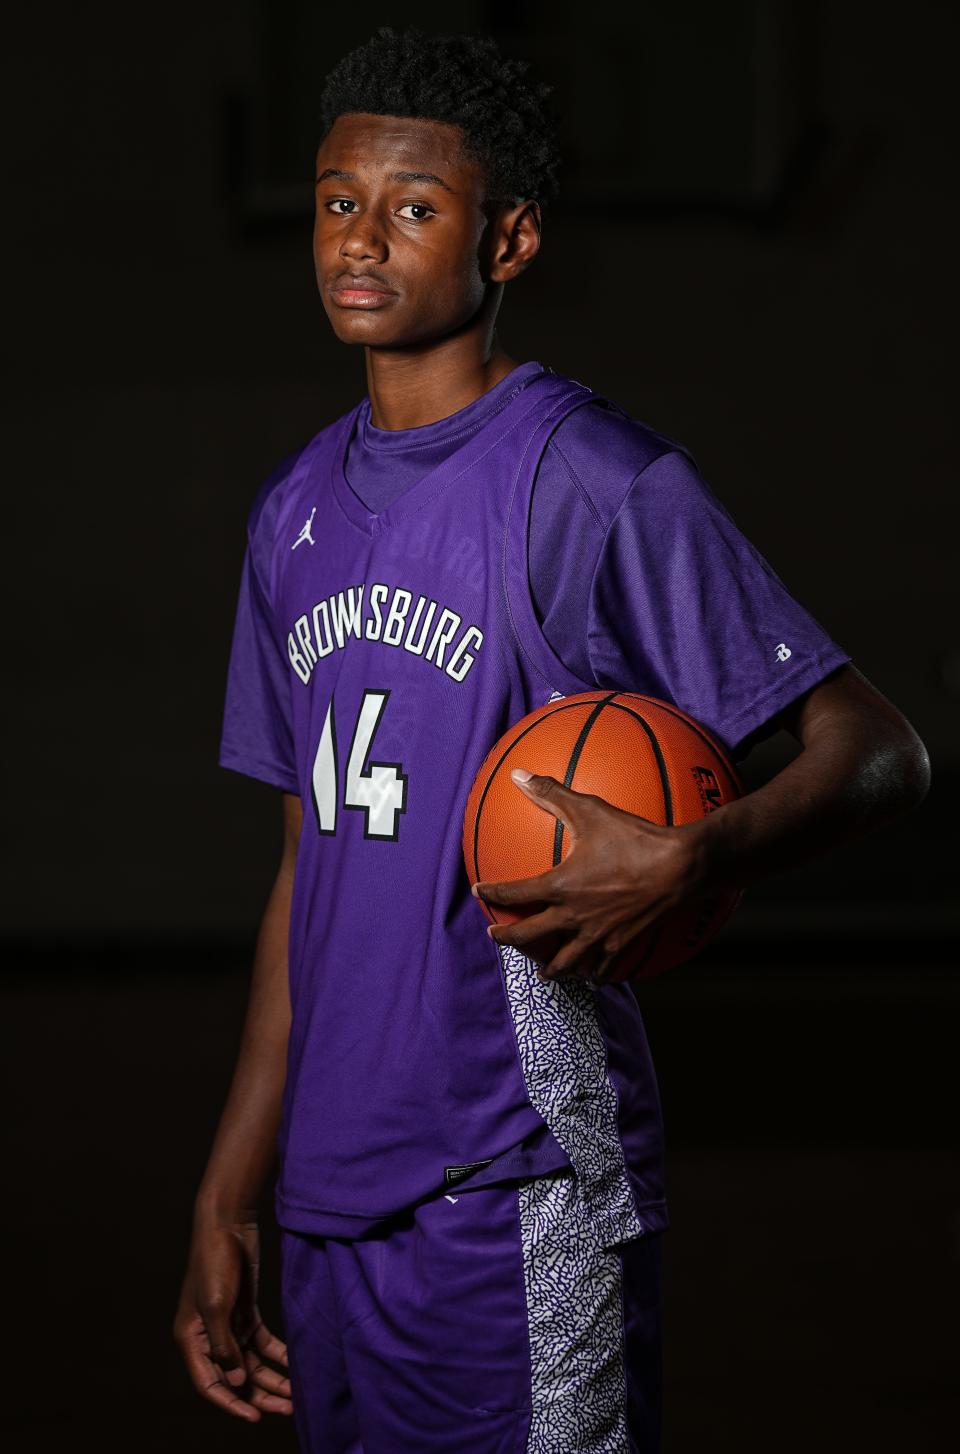 Brownsburg Kanon Catchings (14) poses for a photo Saturday, Nov 8, 2022 at Ben Davis High School in Indianapolis.